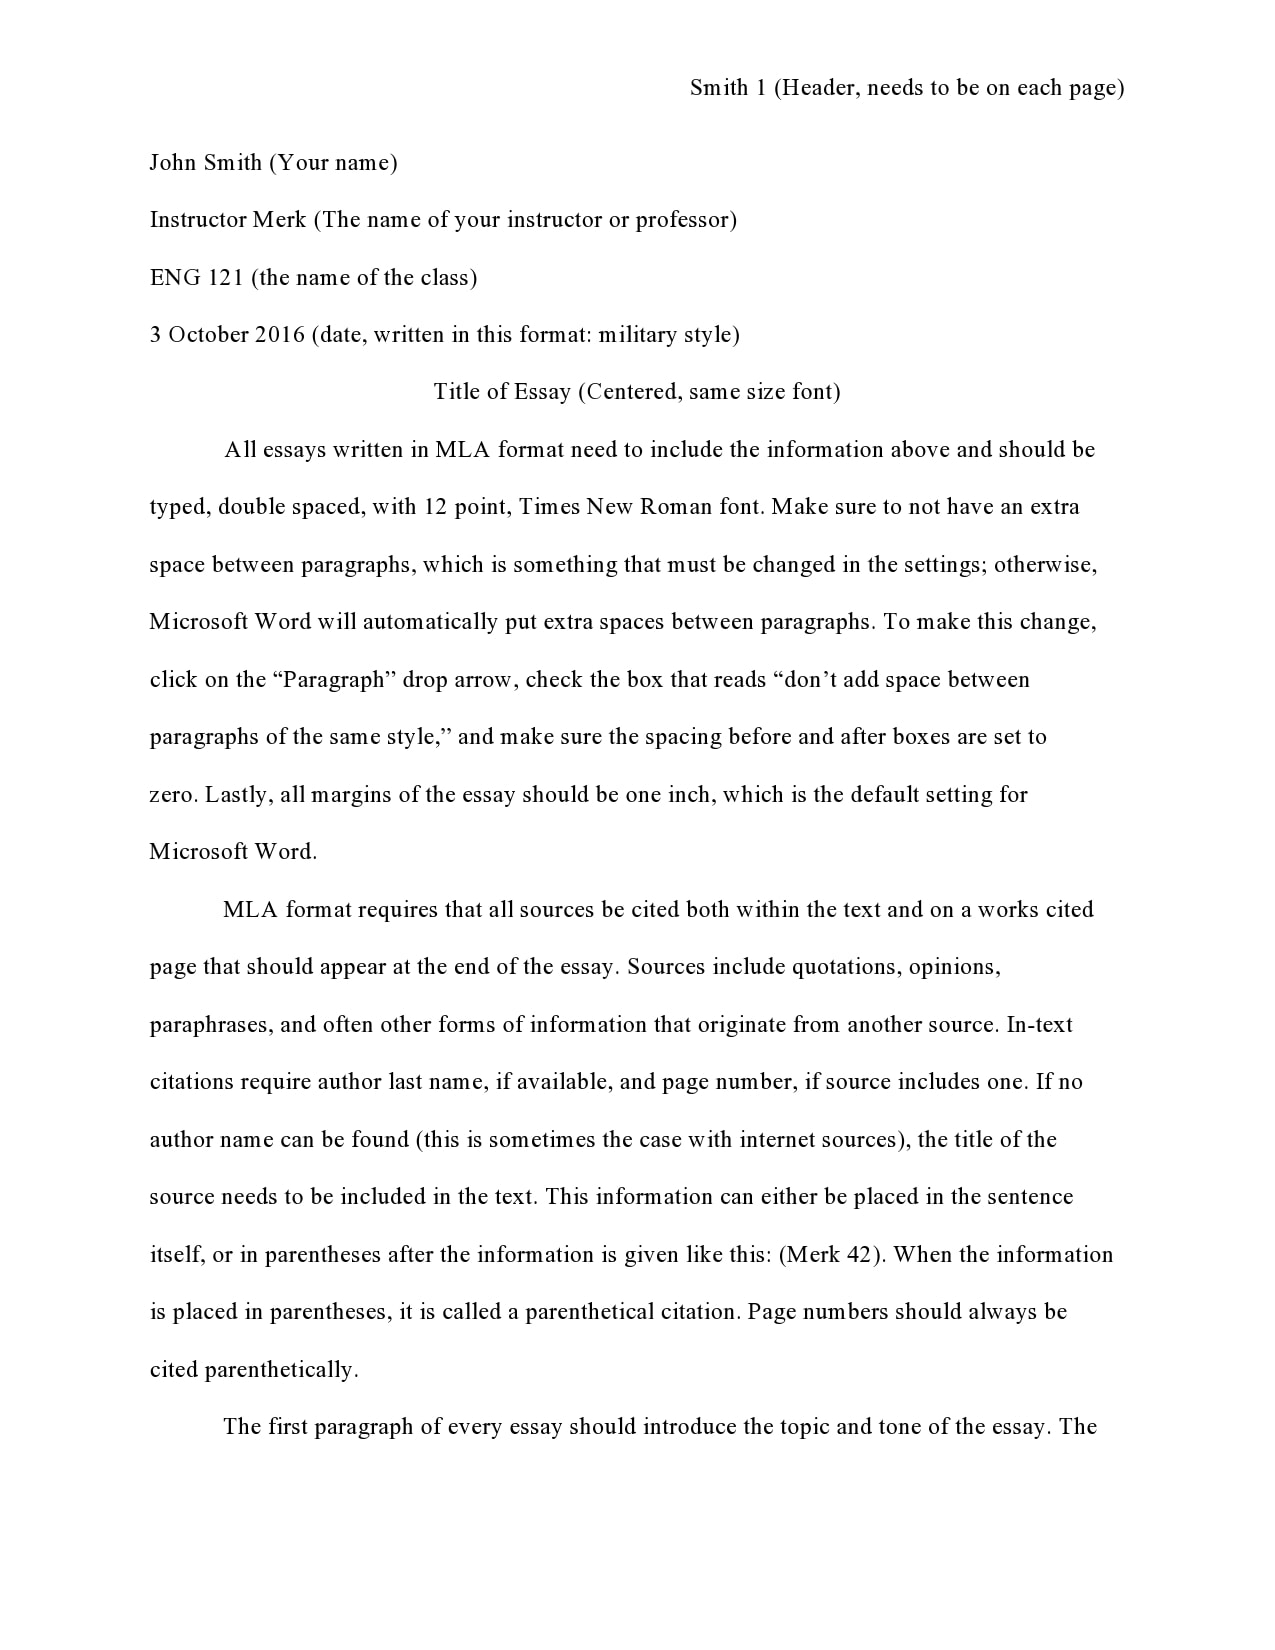 writing a strong college essay